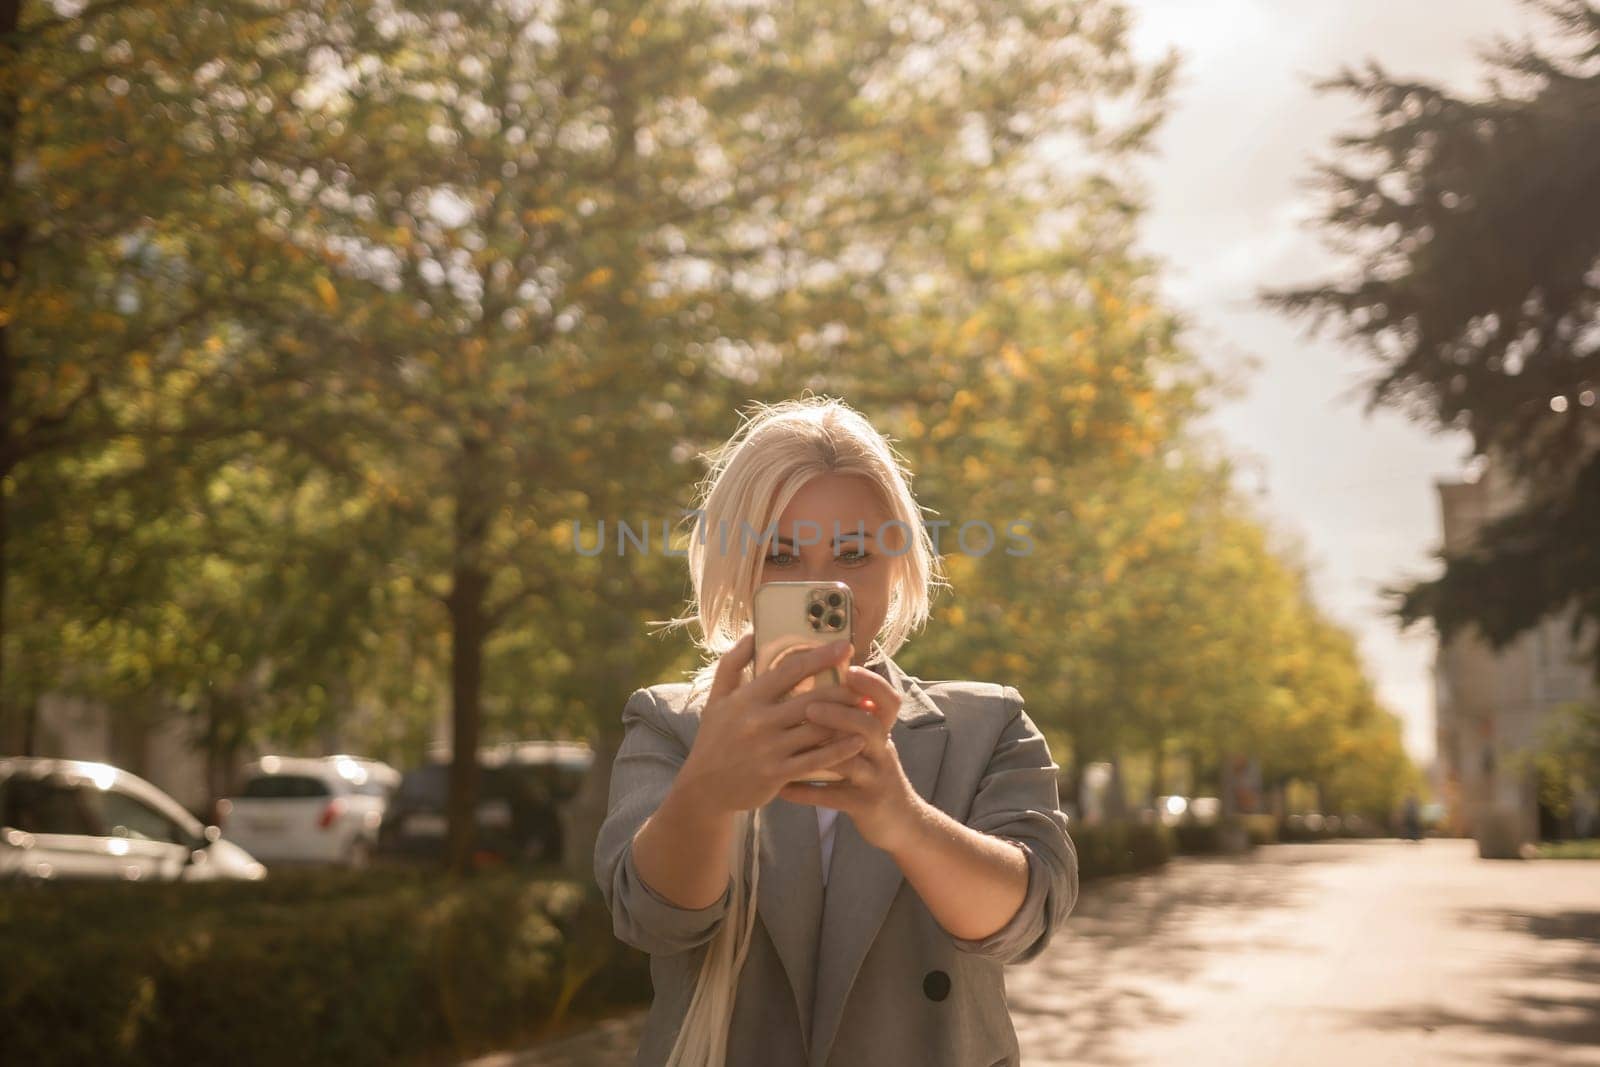 A woman is taking a picture of herself with her cell phone. She is wearing a gray jacket and scarf. The scene is set in a city with trees and cars in the background